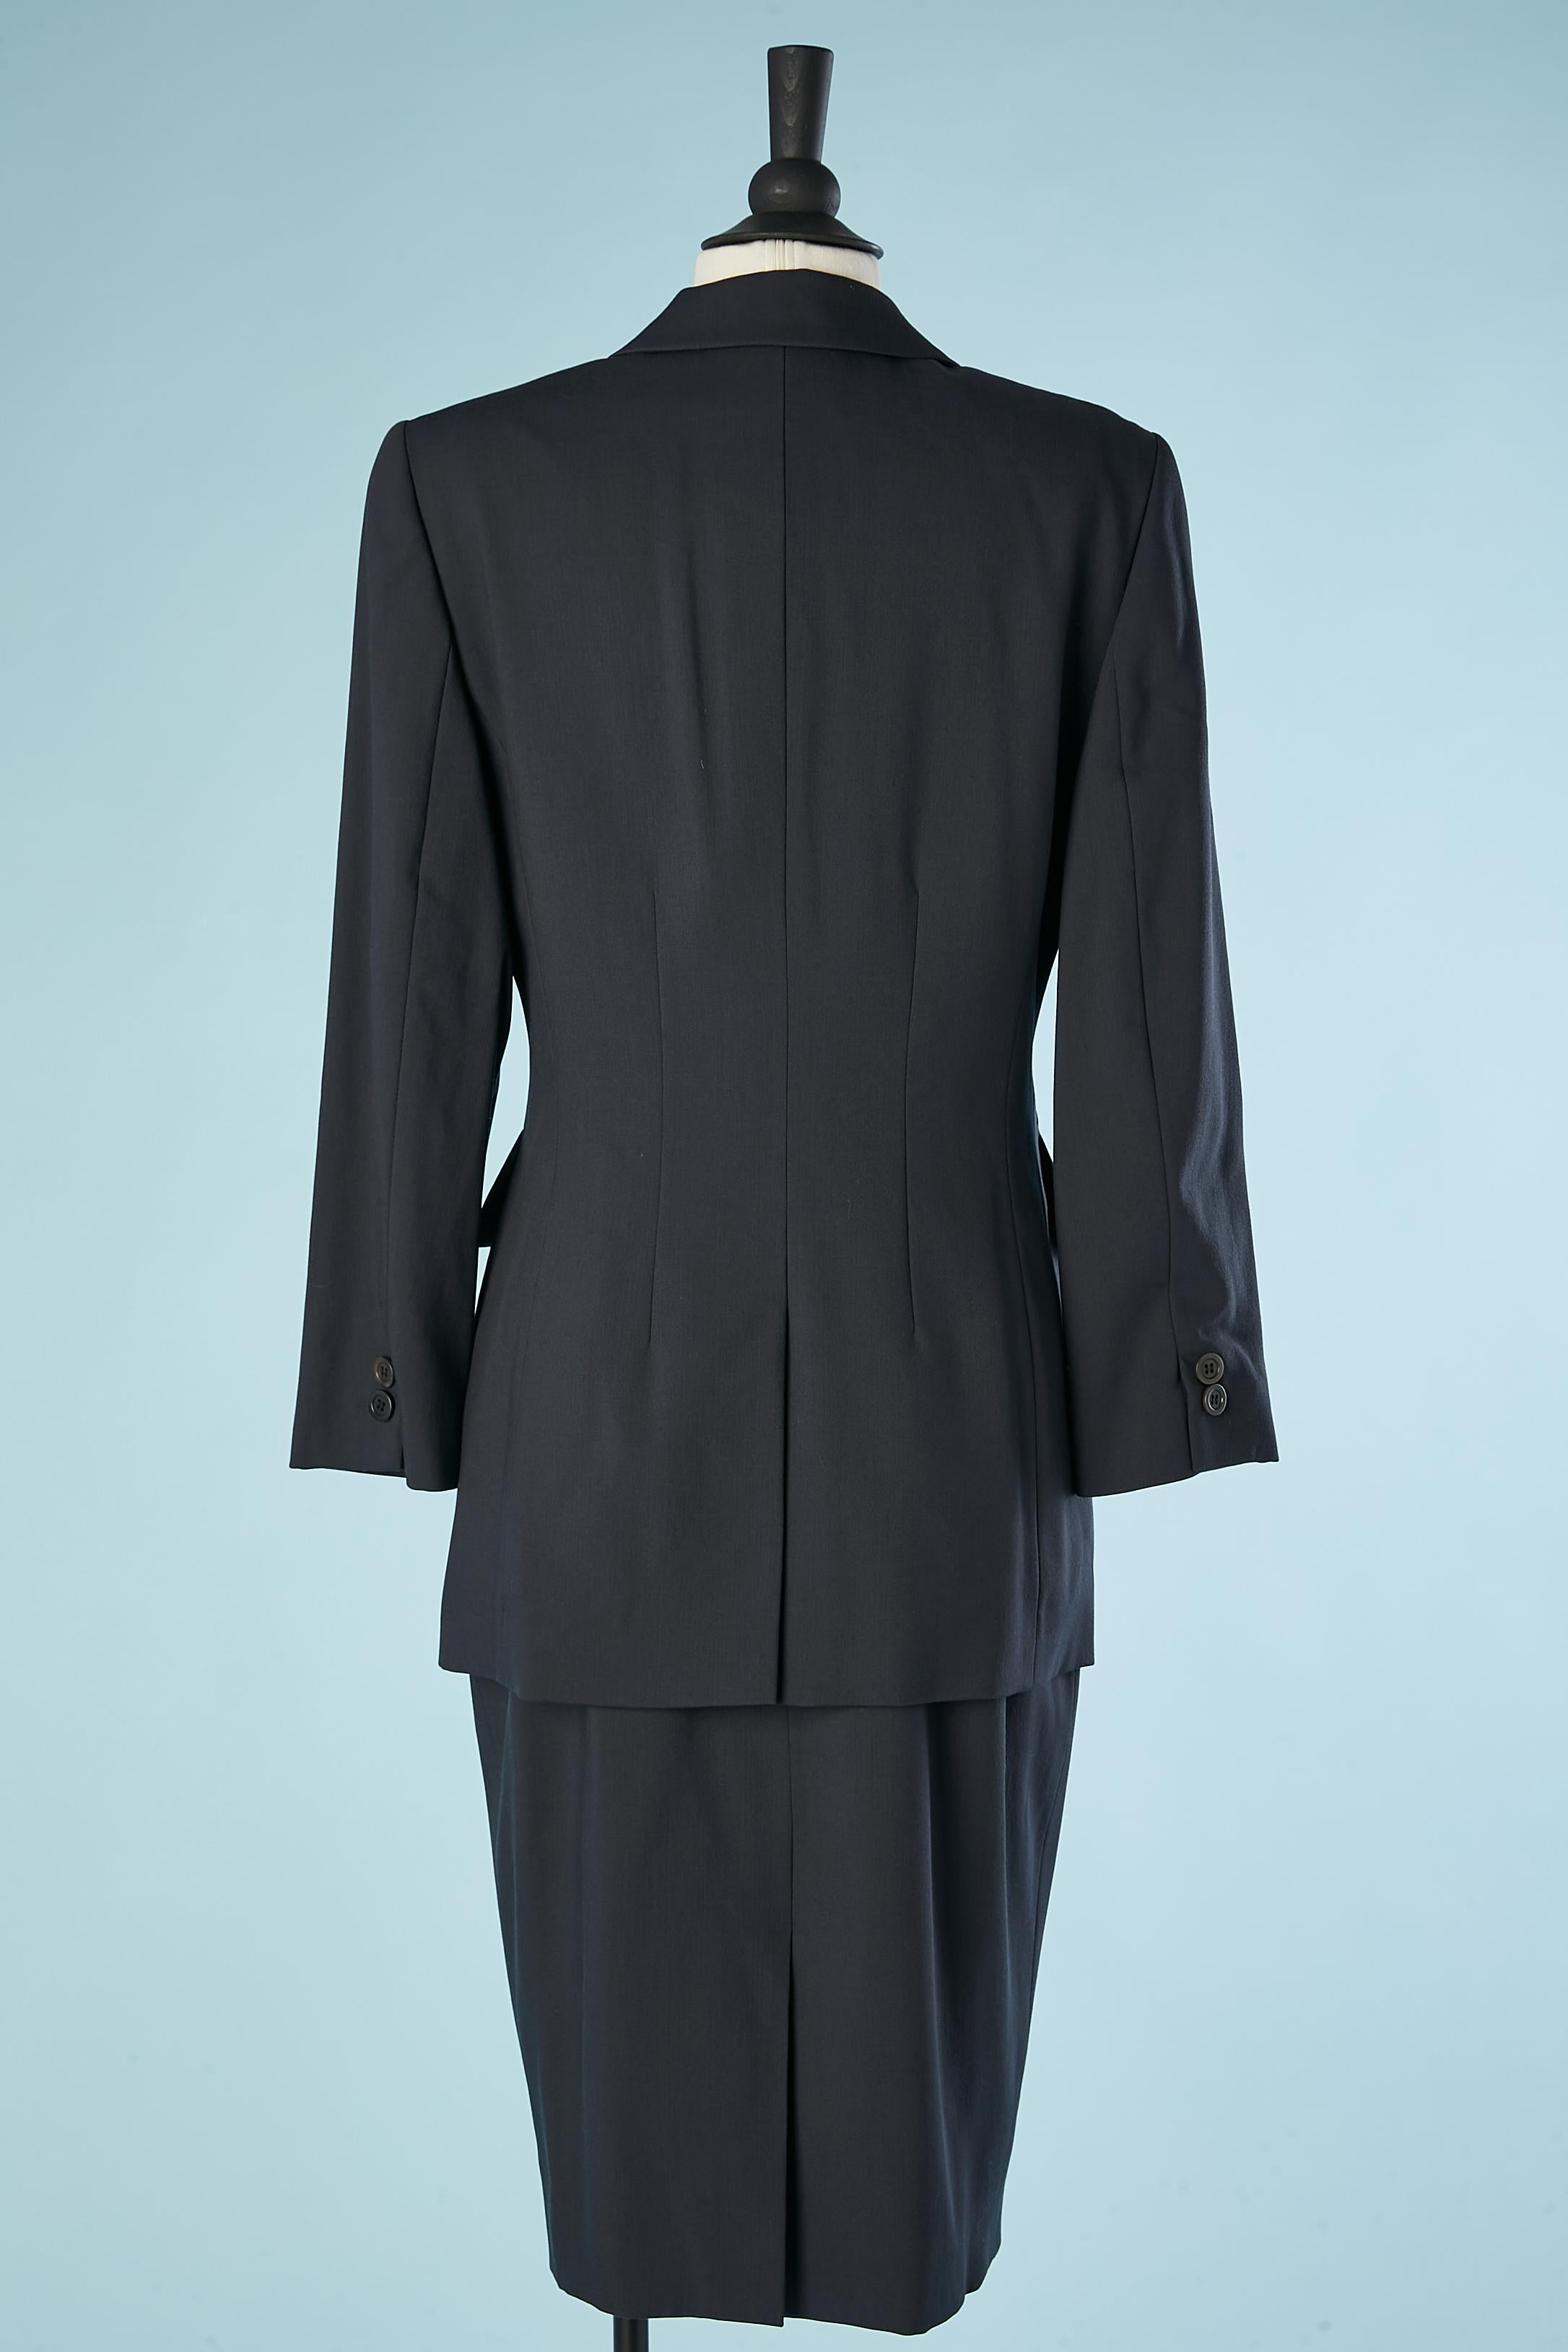 Wool navy blue trouser-suit (and skirt as well) Cerruti 1881 For Sale 7